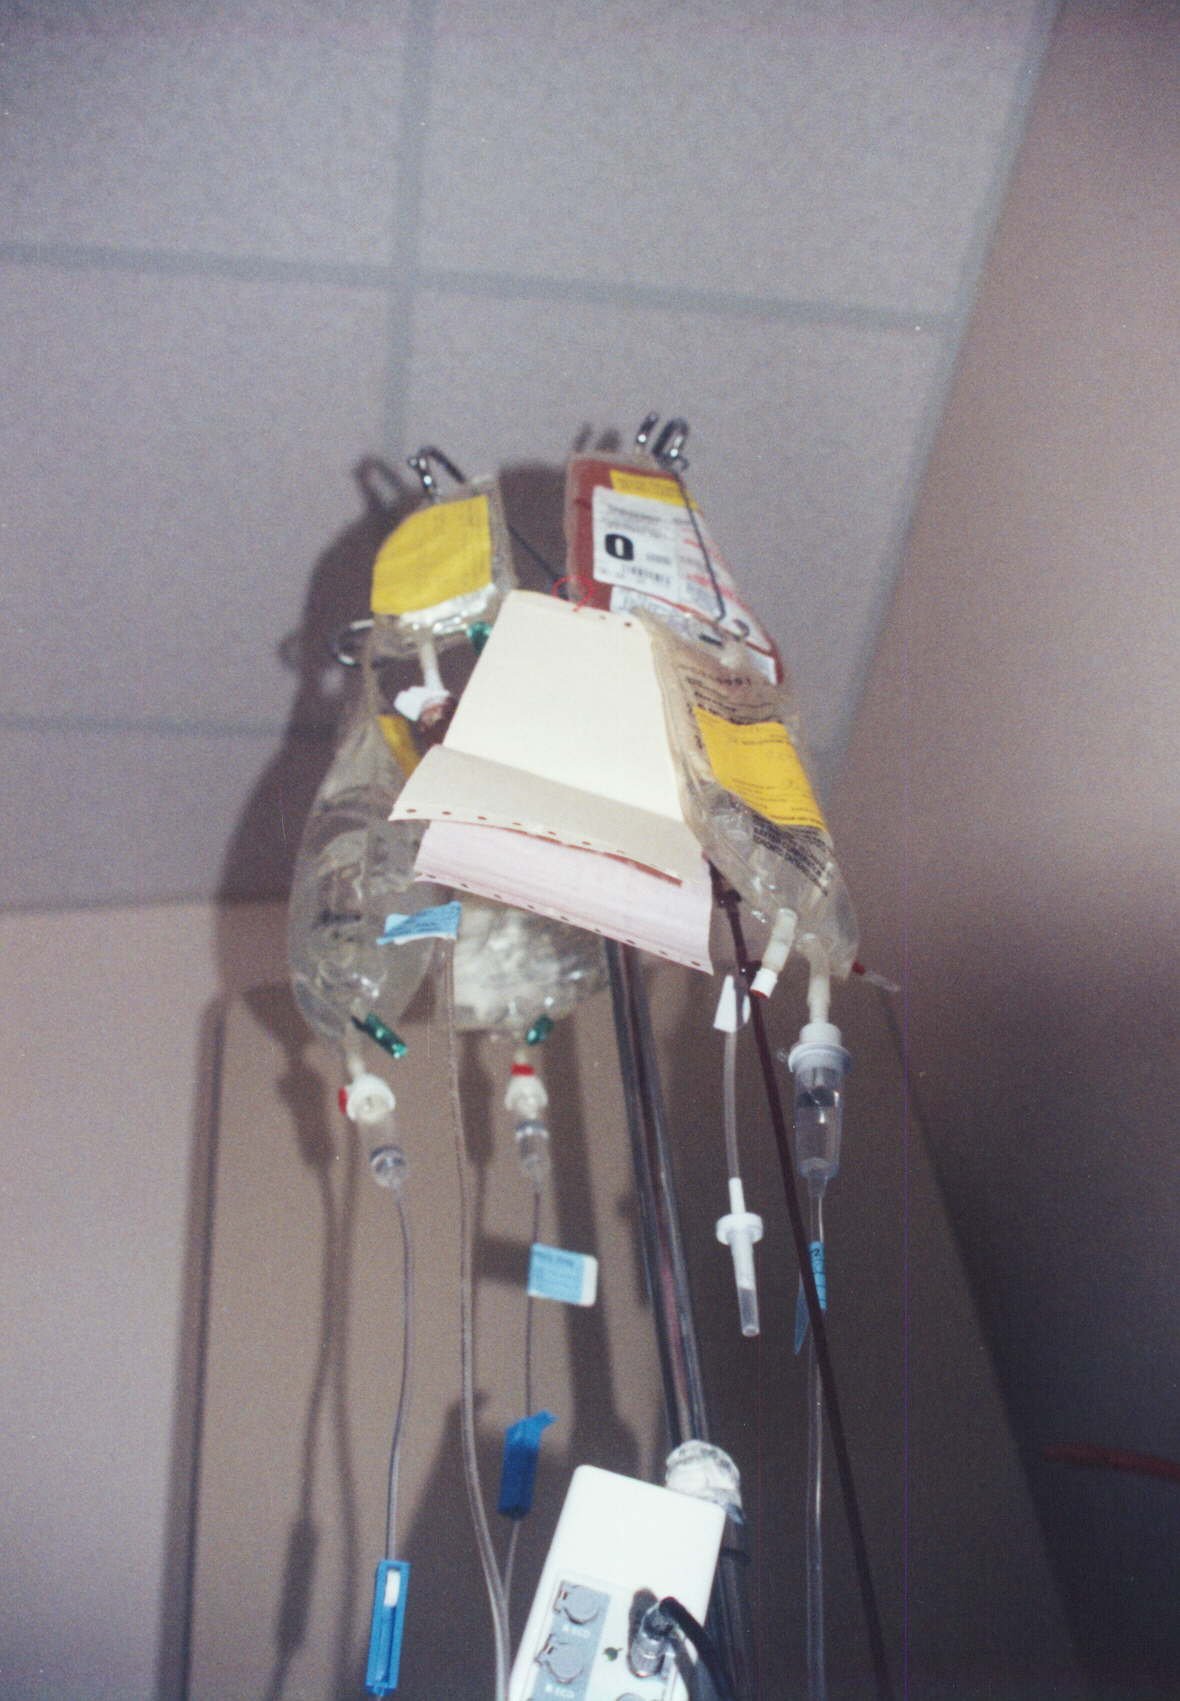  Early on during his first round of chemotherapy, Brendan was constantly connected to infusion pumps. For weeks at a time this was his view at the side of his bed. The chemo reduced his ability to produce blood cells so he had many, many blood and pl